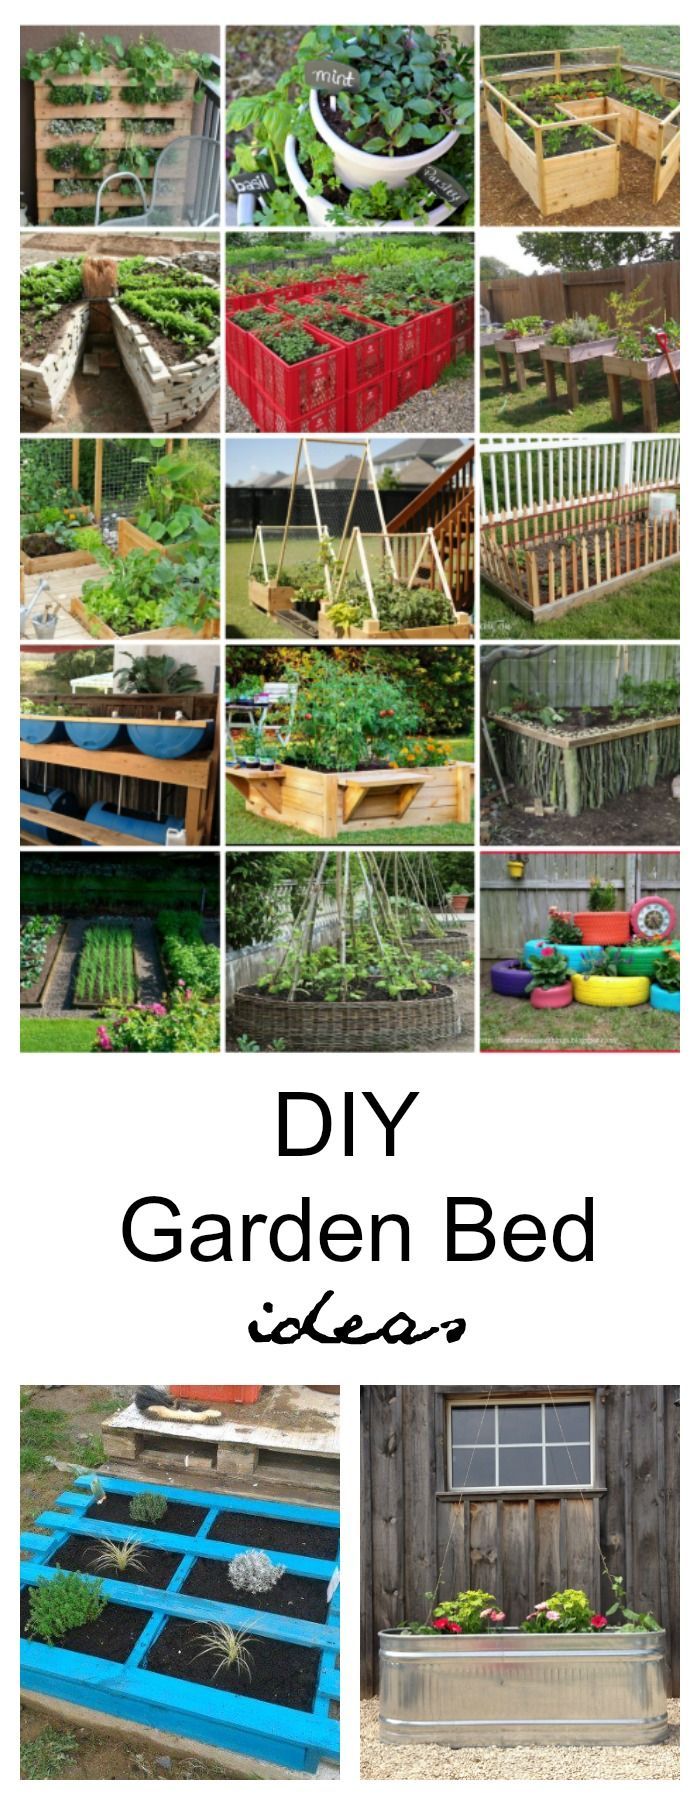 Depending upon your space, style, and needs, I have rounded up some DIY Garden B...